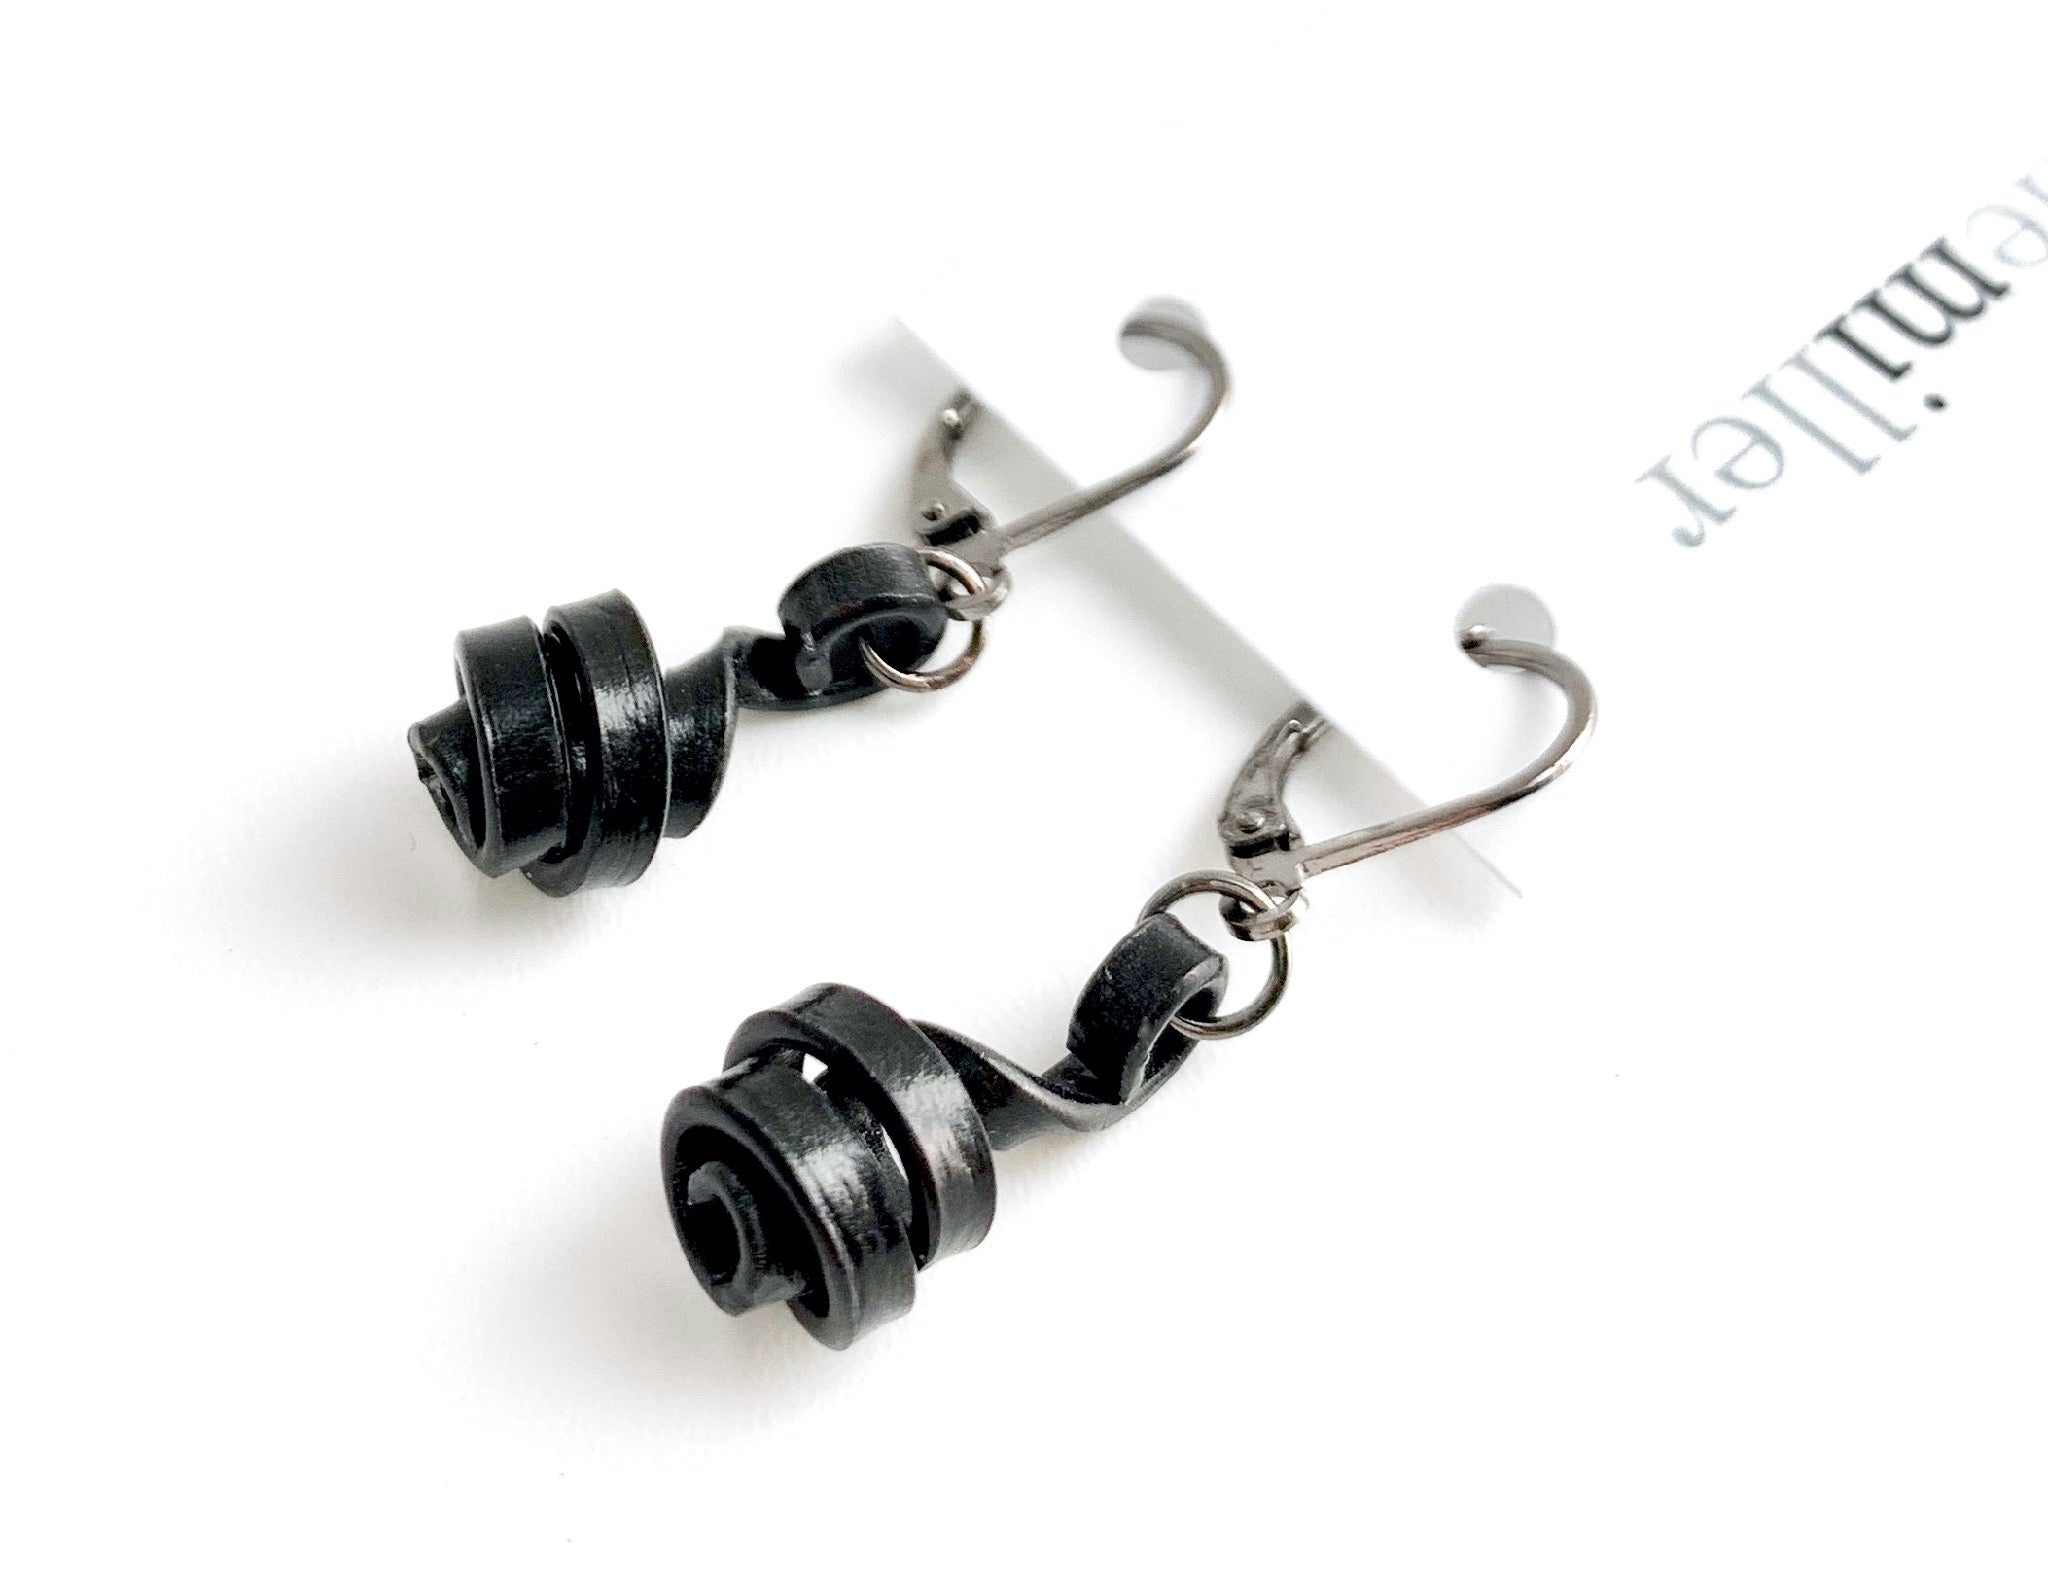 These Loopt earrings are super light weight and hang about 2cm long. They are made of aluminum wire.